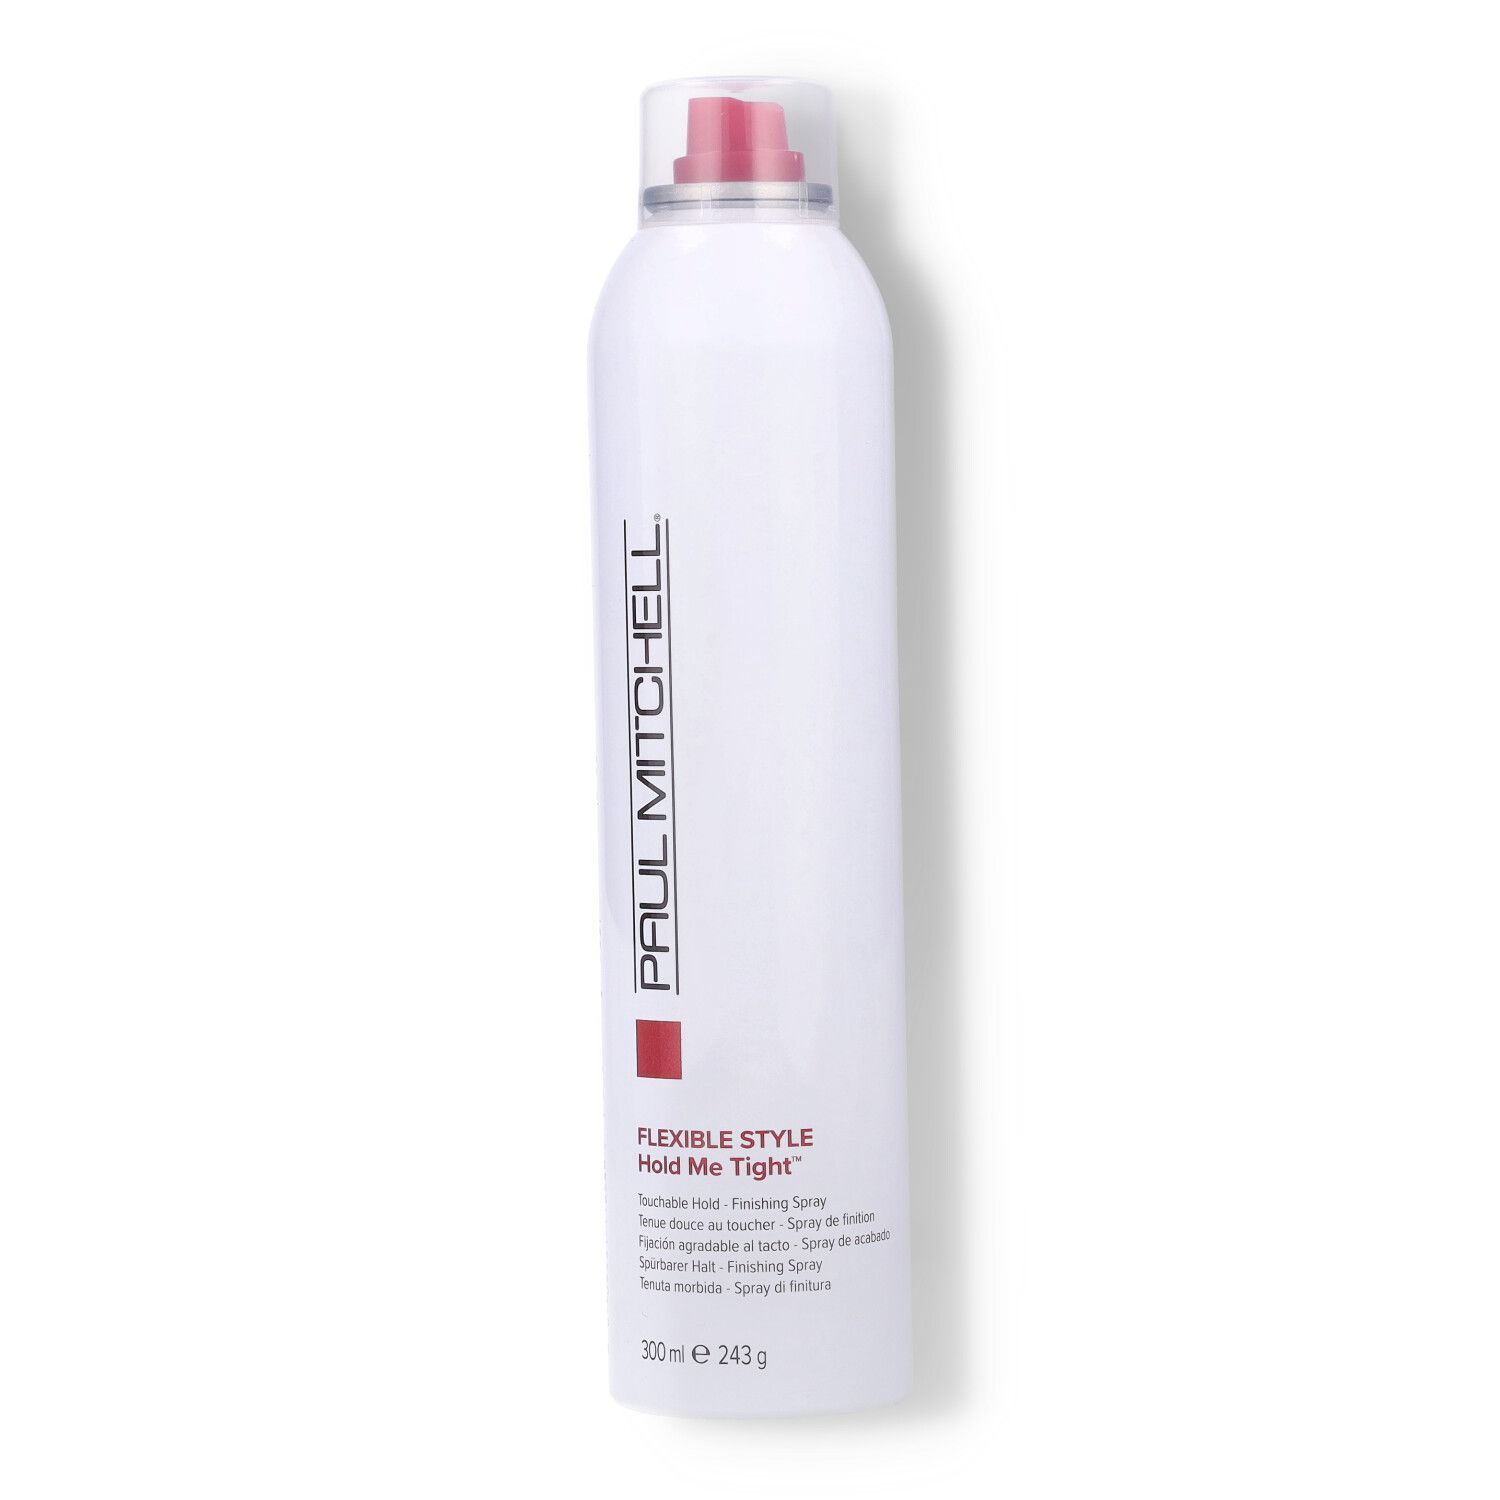 Paul Mitchell Flexible Style Hold Me Tight - 300ml